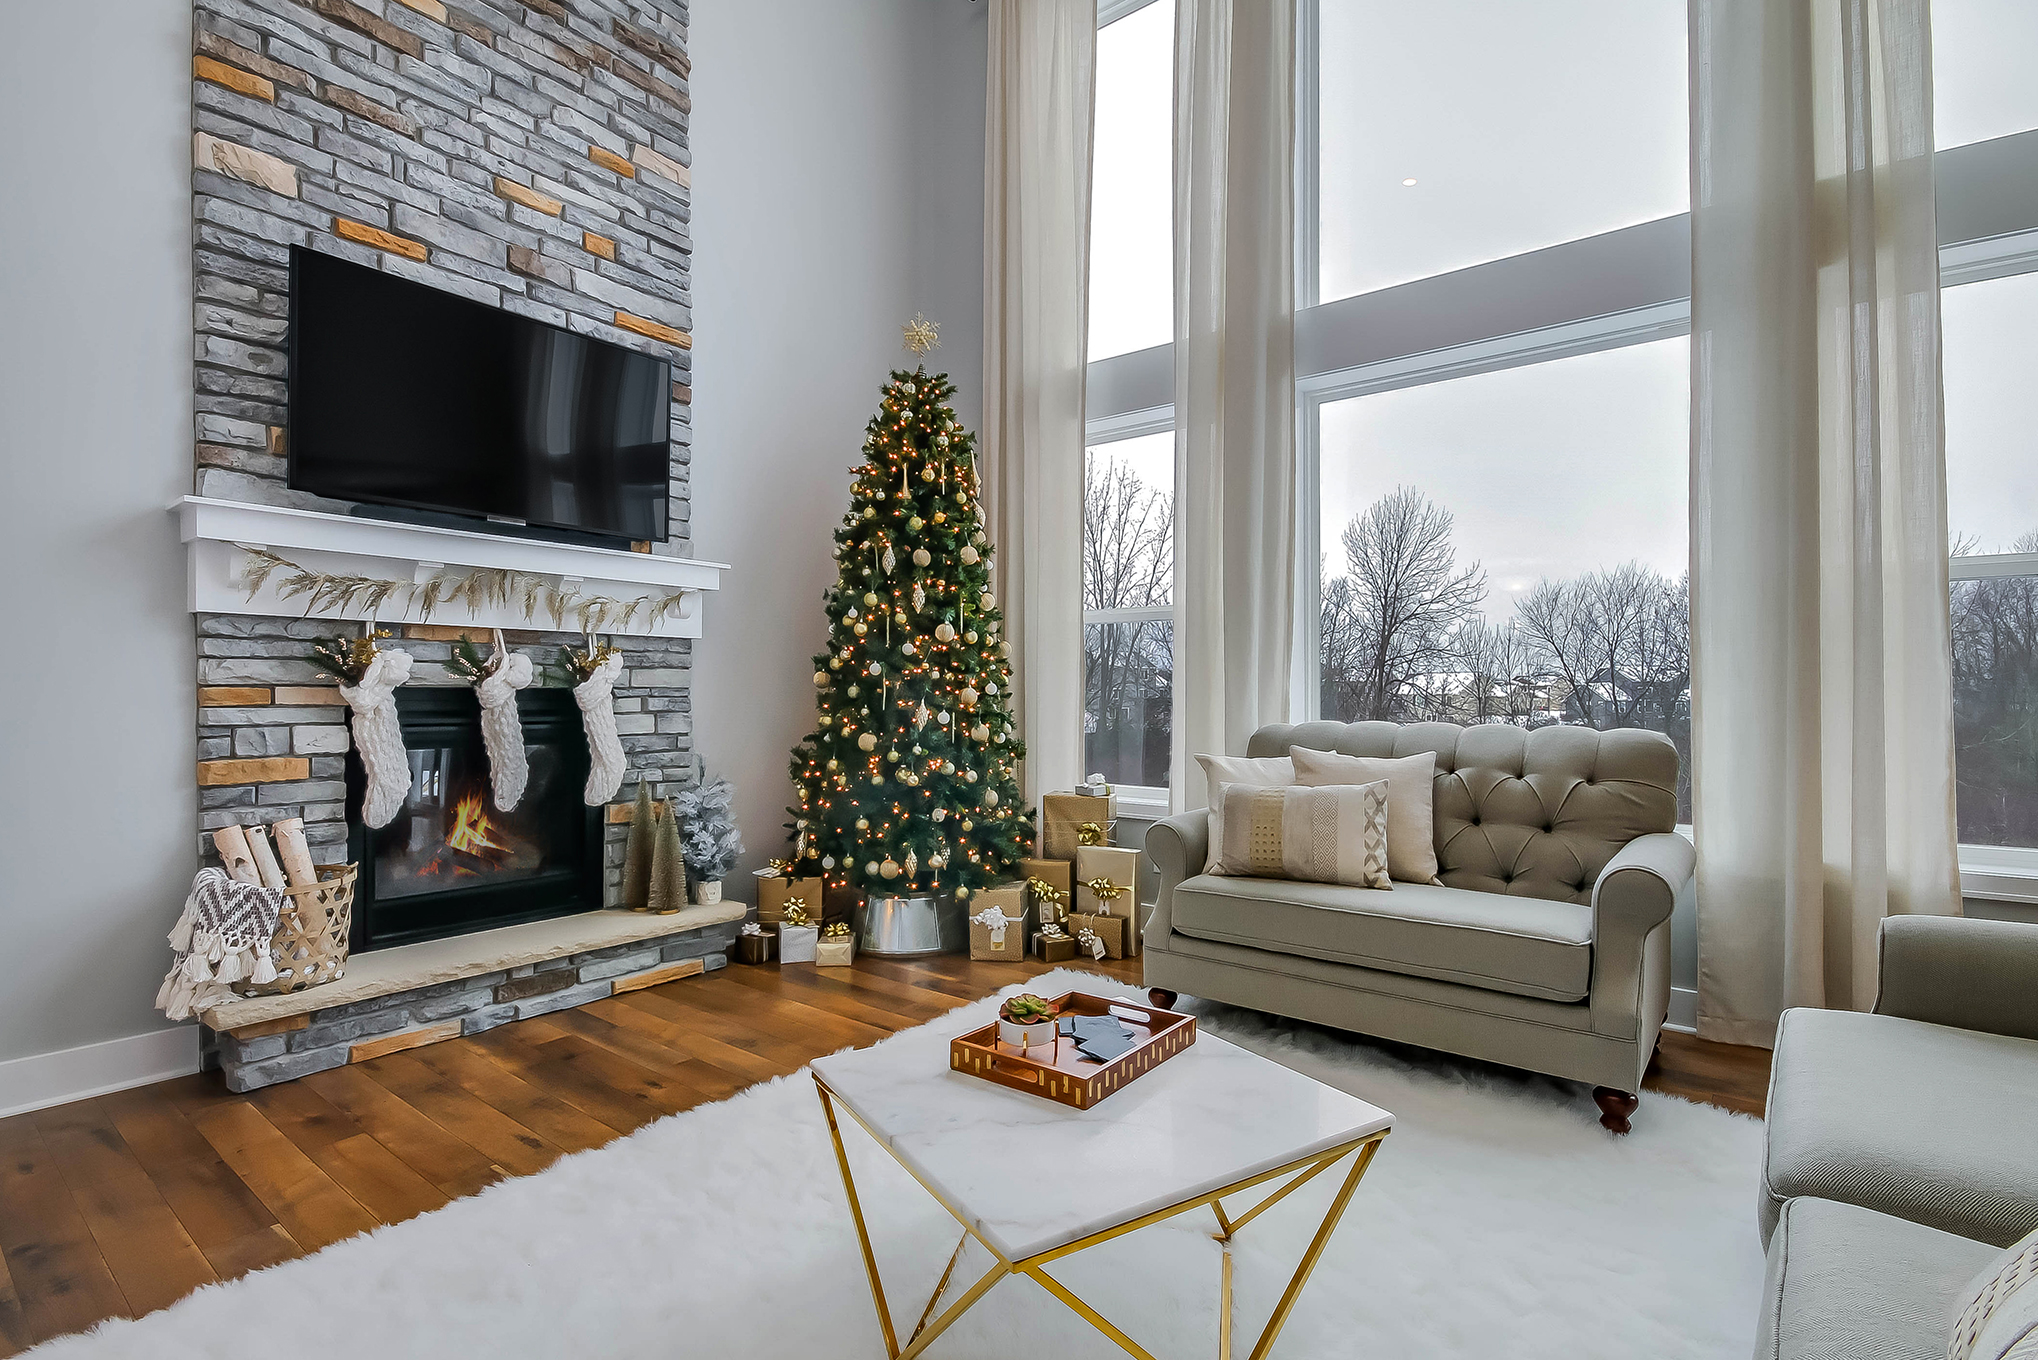 Home for the Holidays with Alexis and Bentley! | Eastbrook Homes